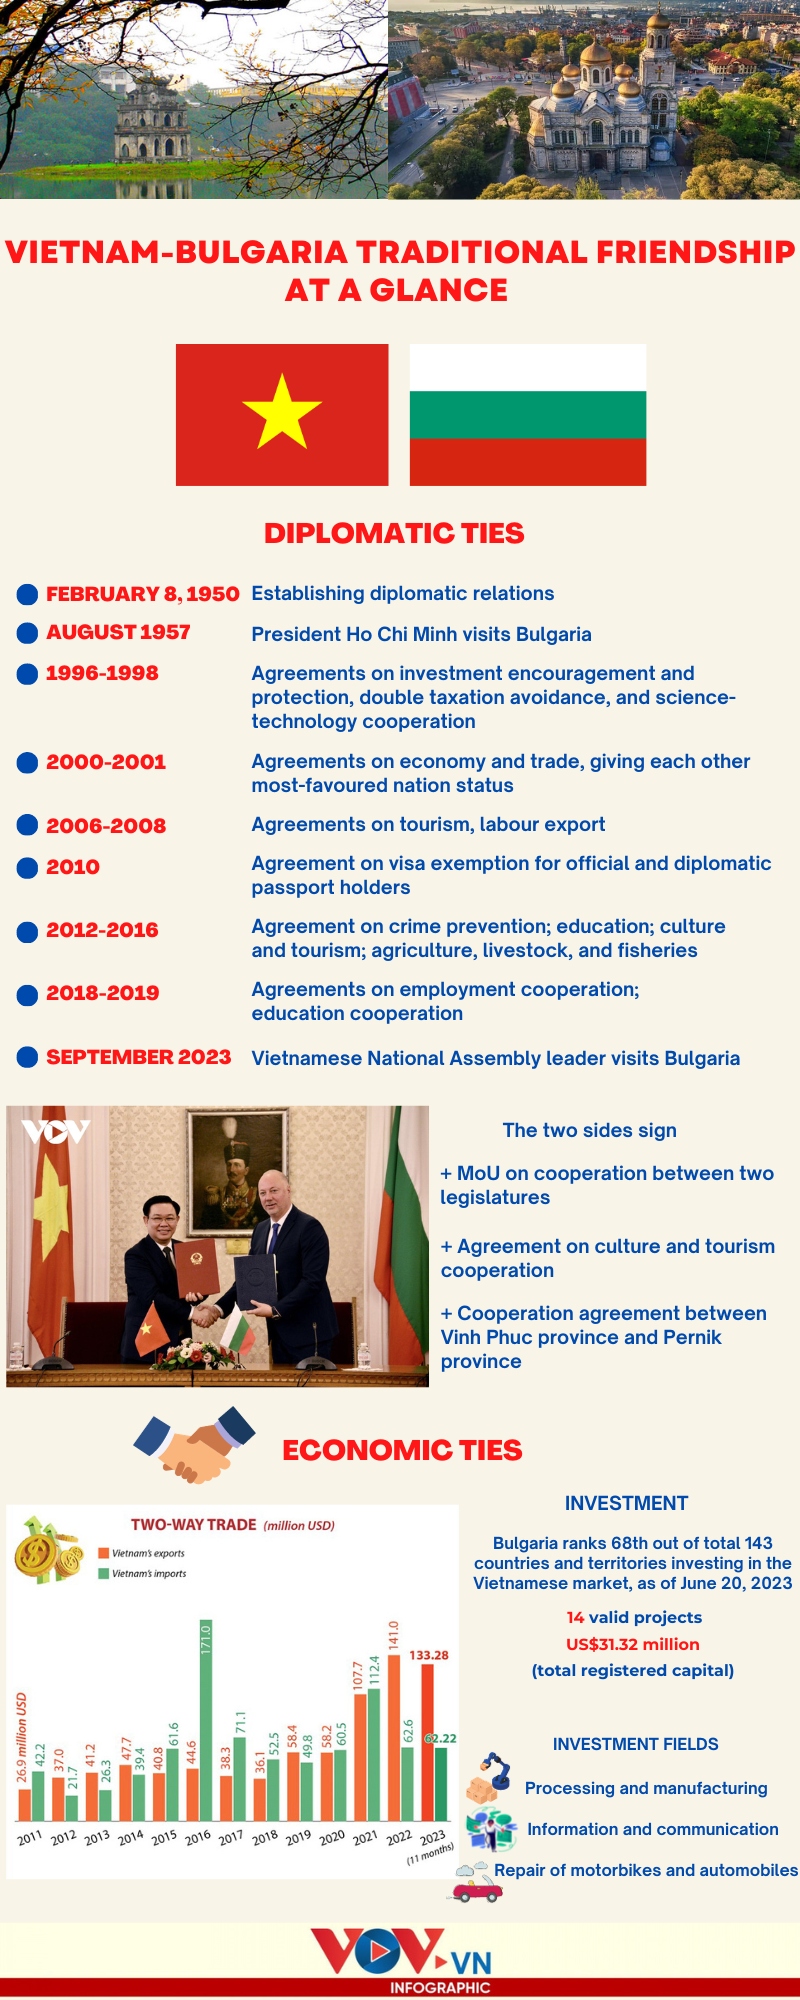 overview of 74-year vietnam-bulgaria traditional friendship picture 1